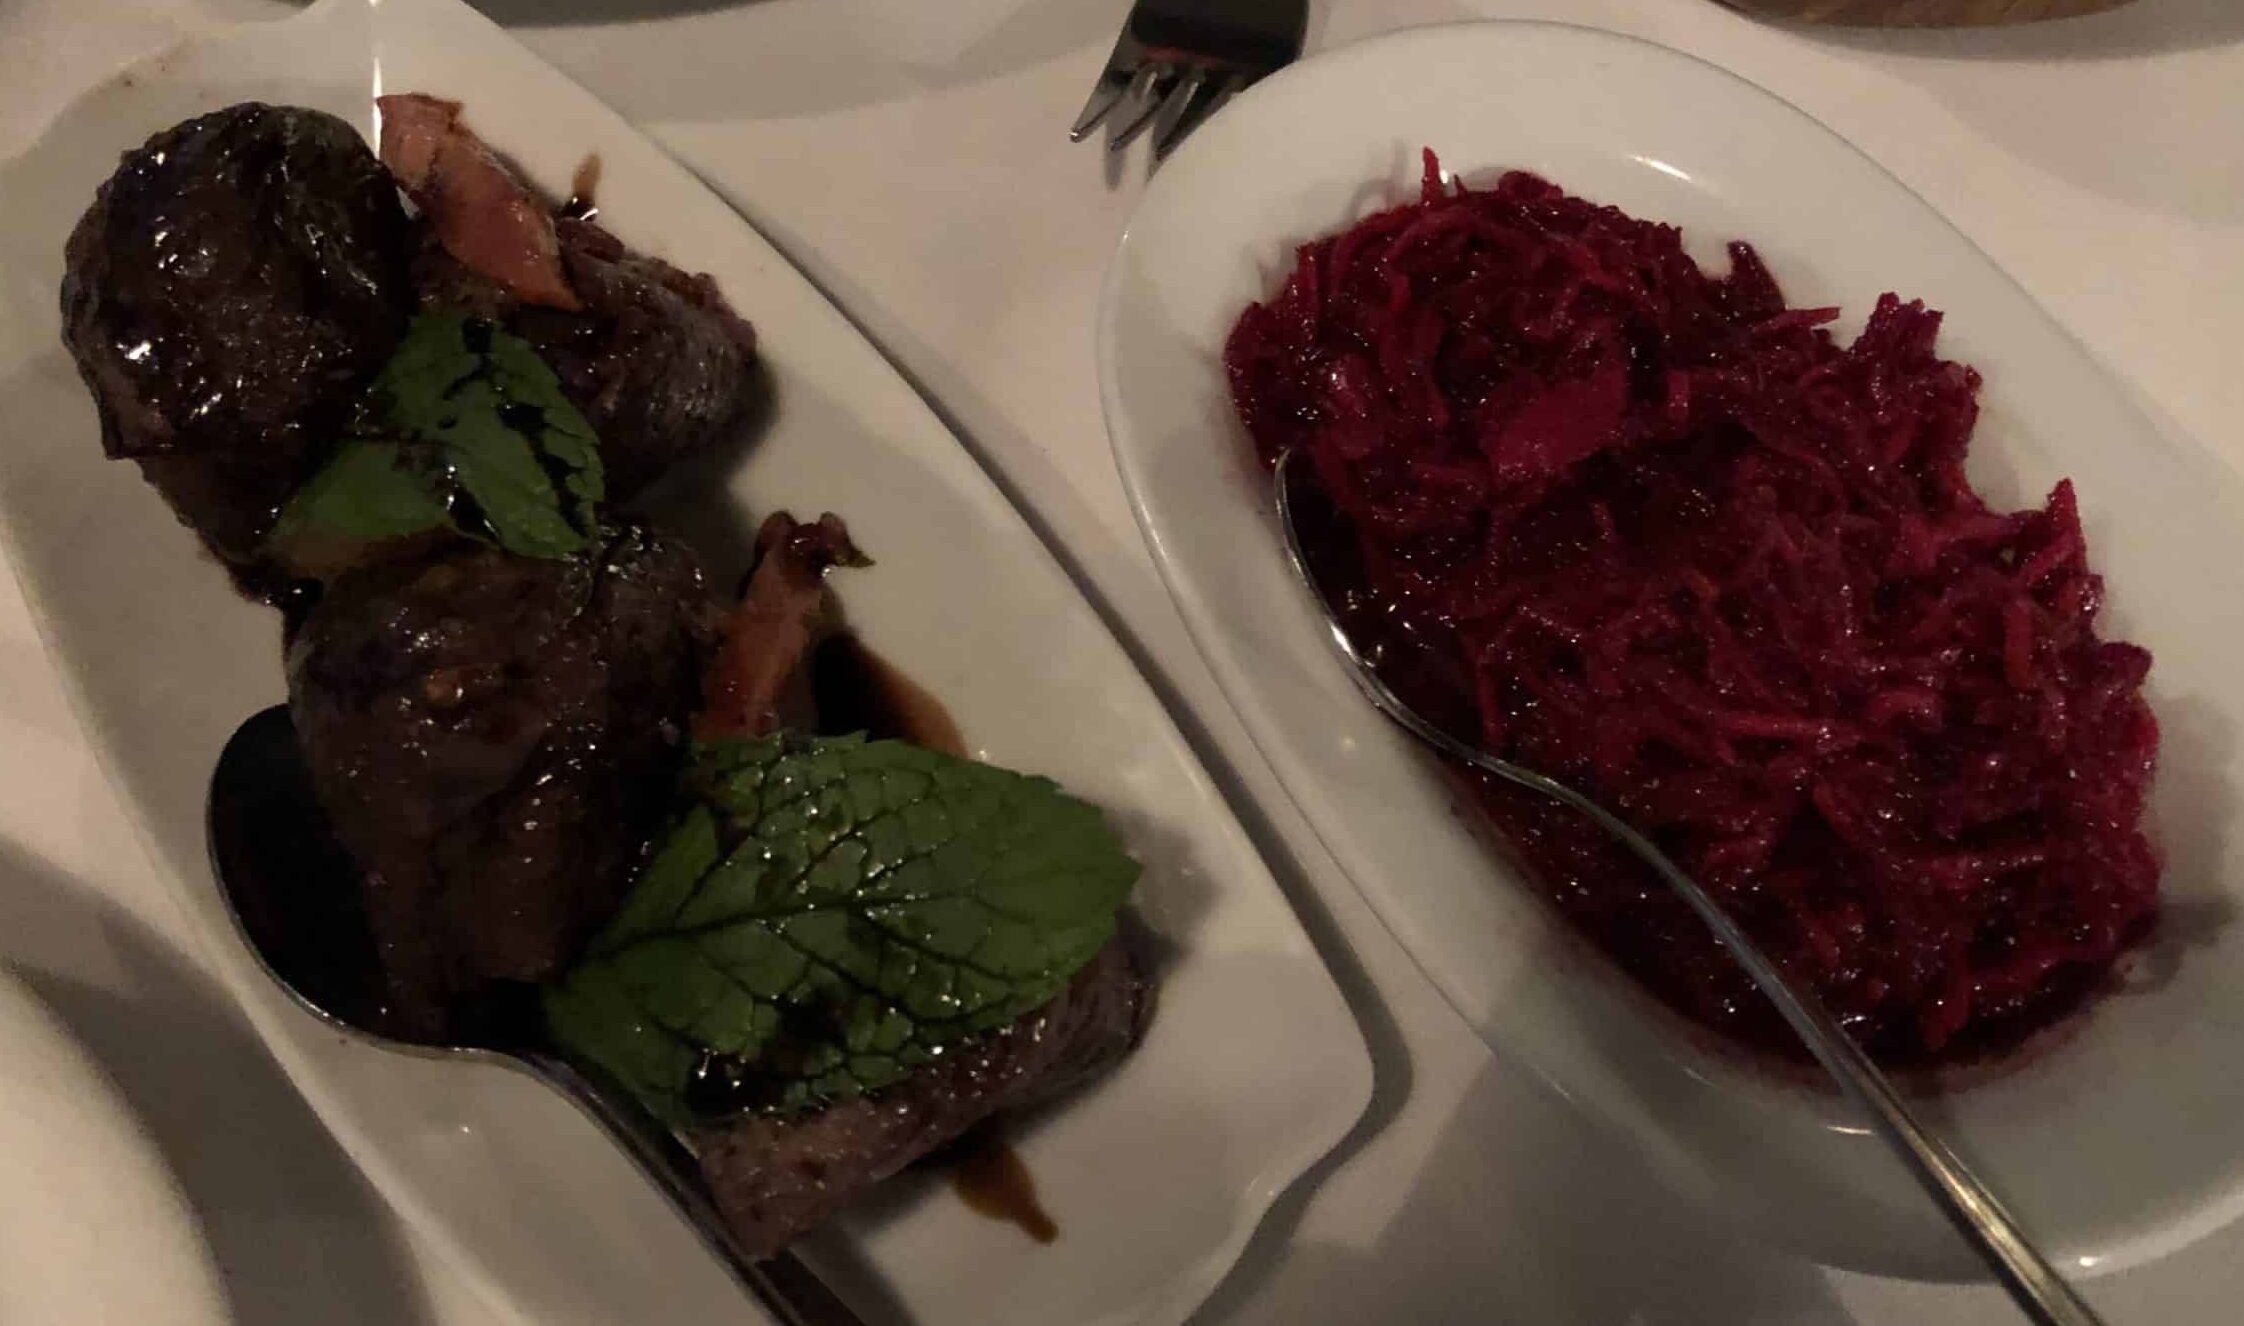 Eggplant stuffed with sour cherries (left) and beet salad (right) at Leb-i Derya